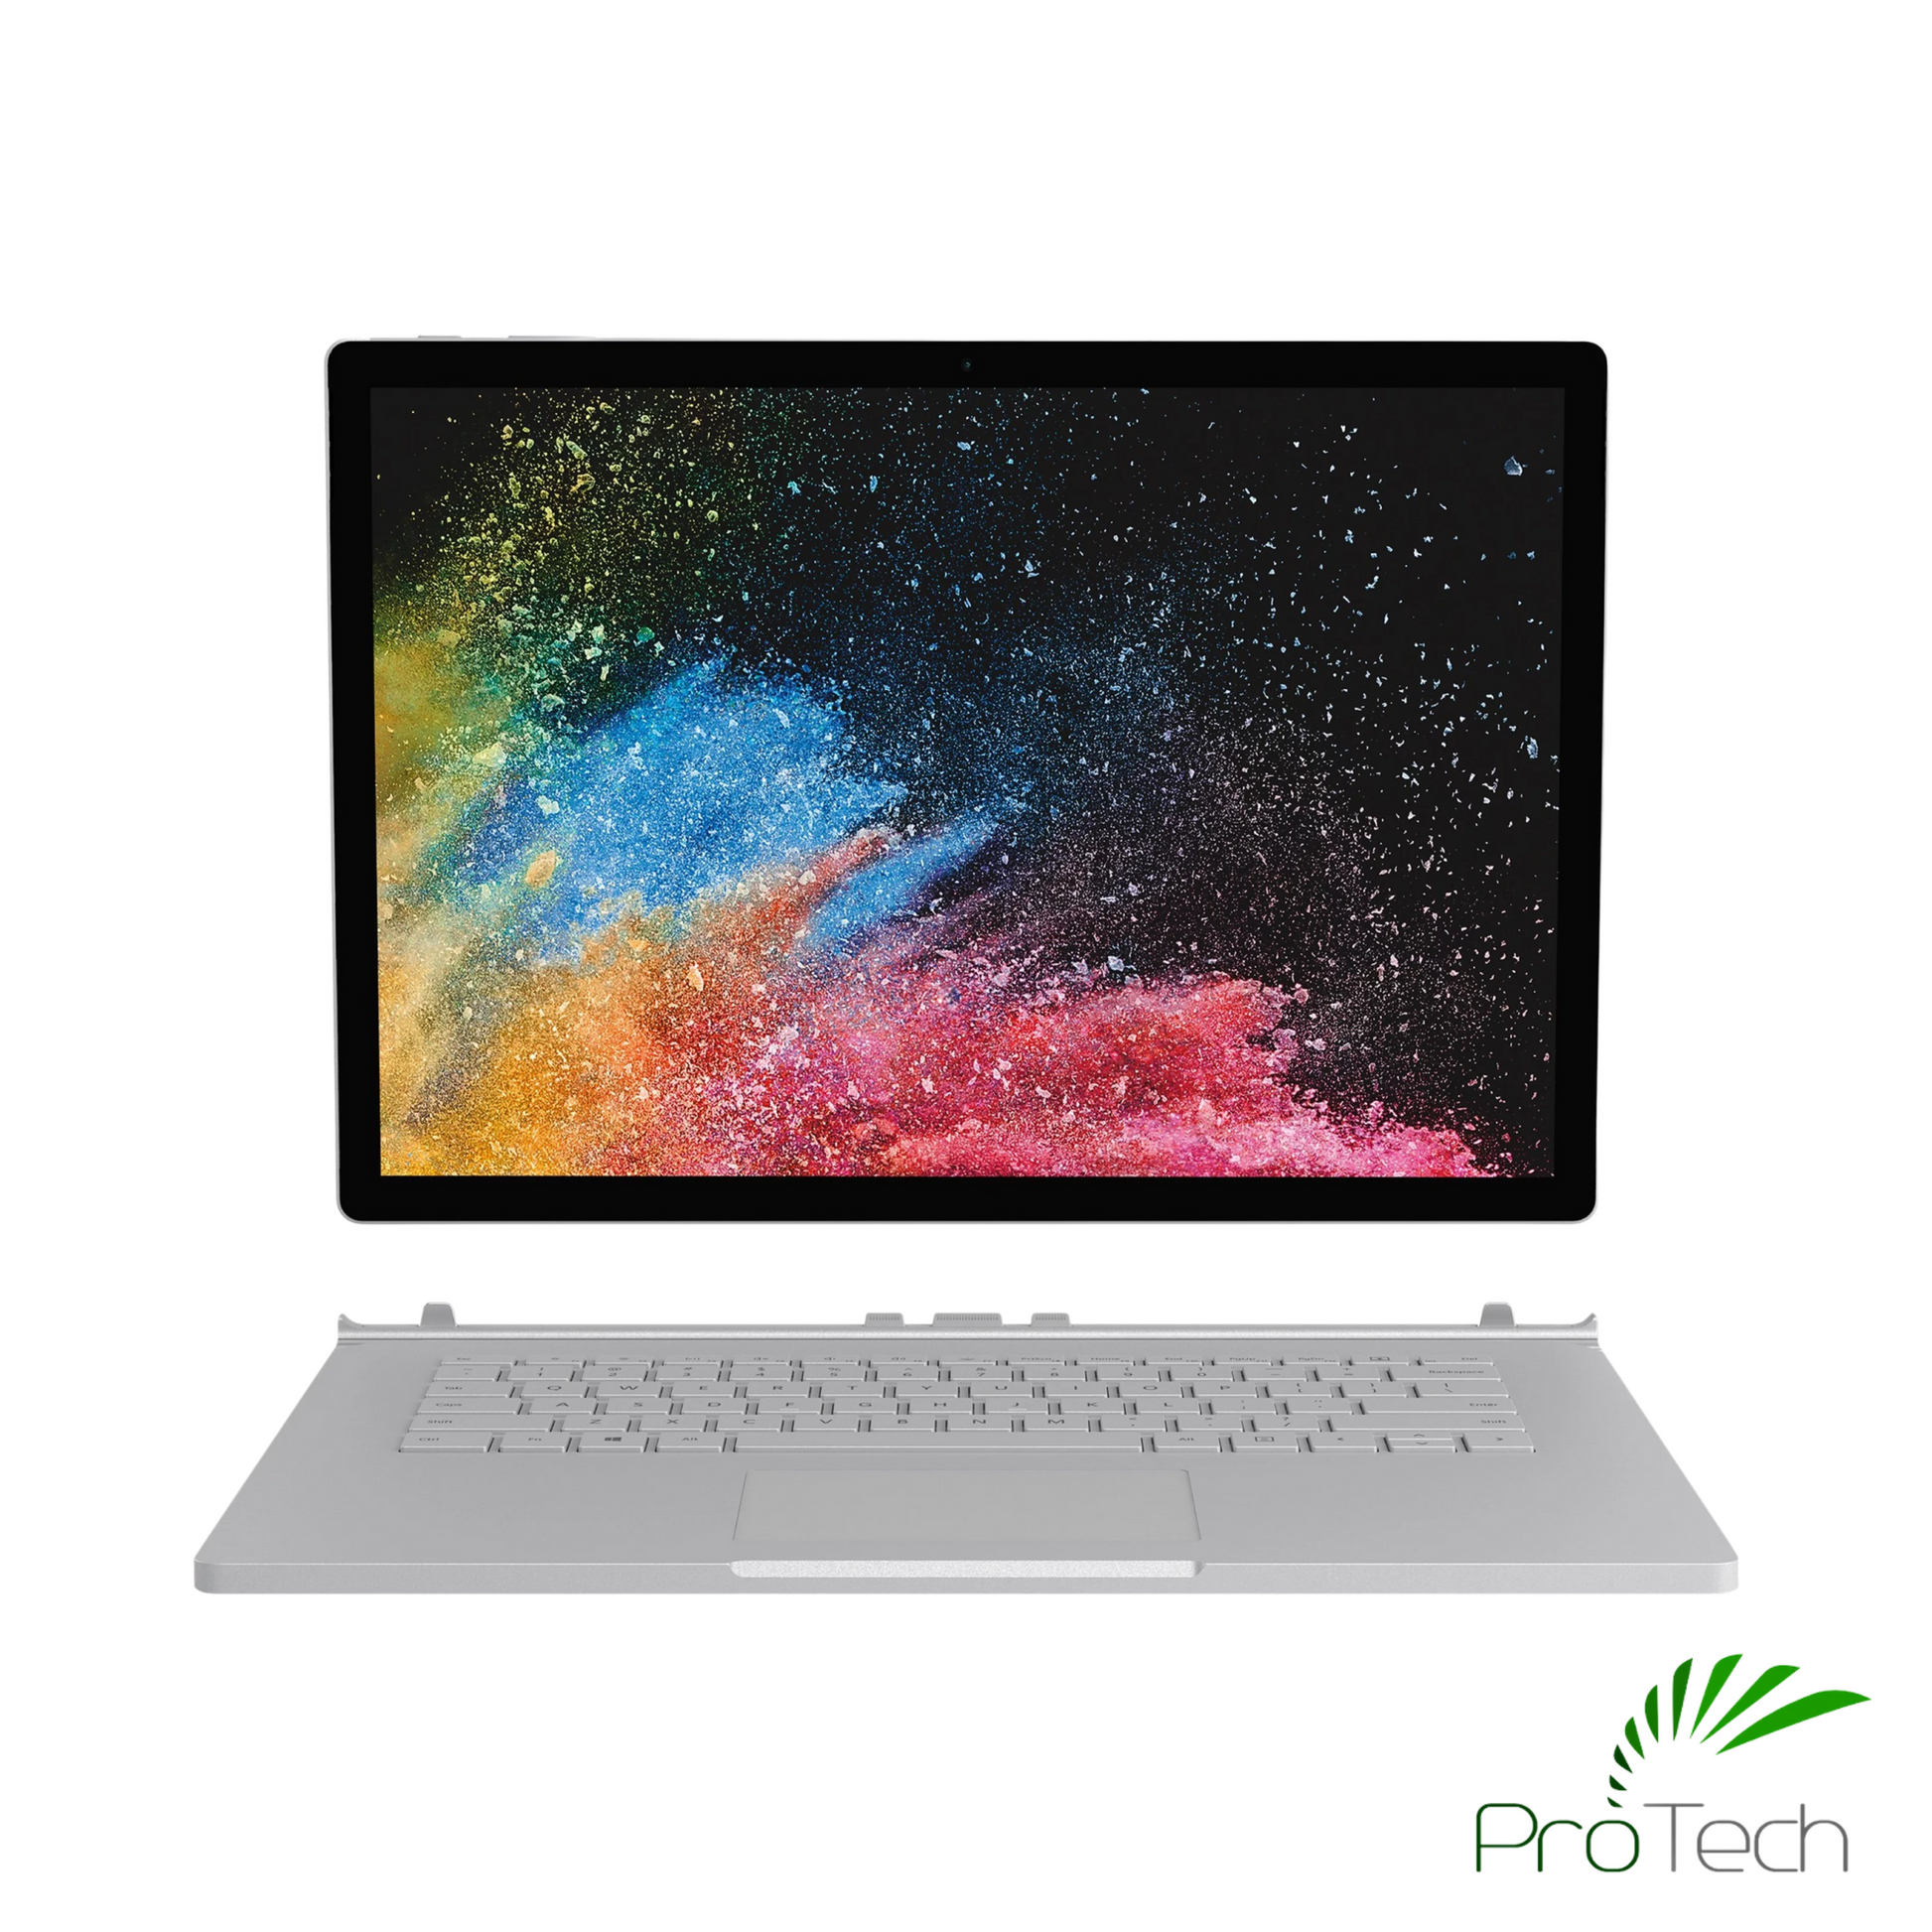 Microsoft Surface Book 2 13" | Core i5 | 8GB RAM | 256GB SSD ProTech I.T. Solutions